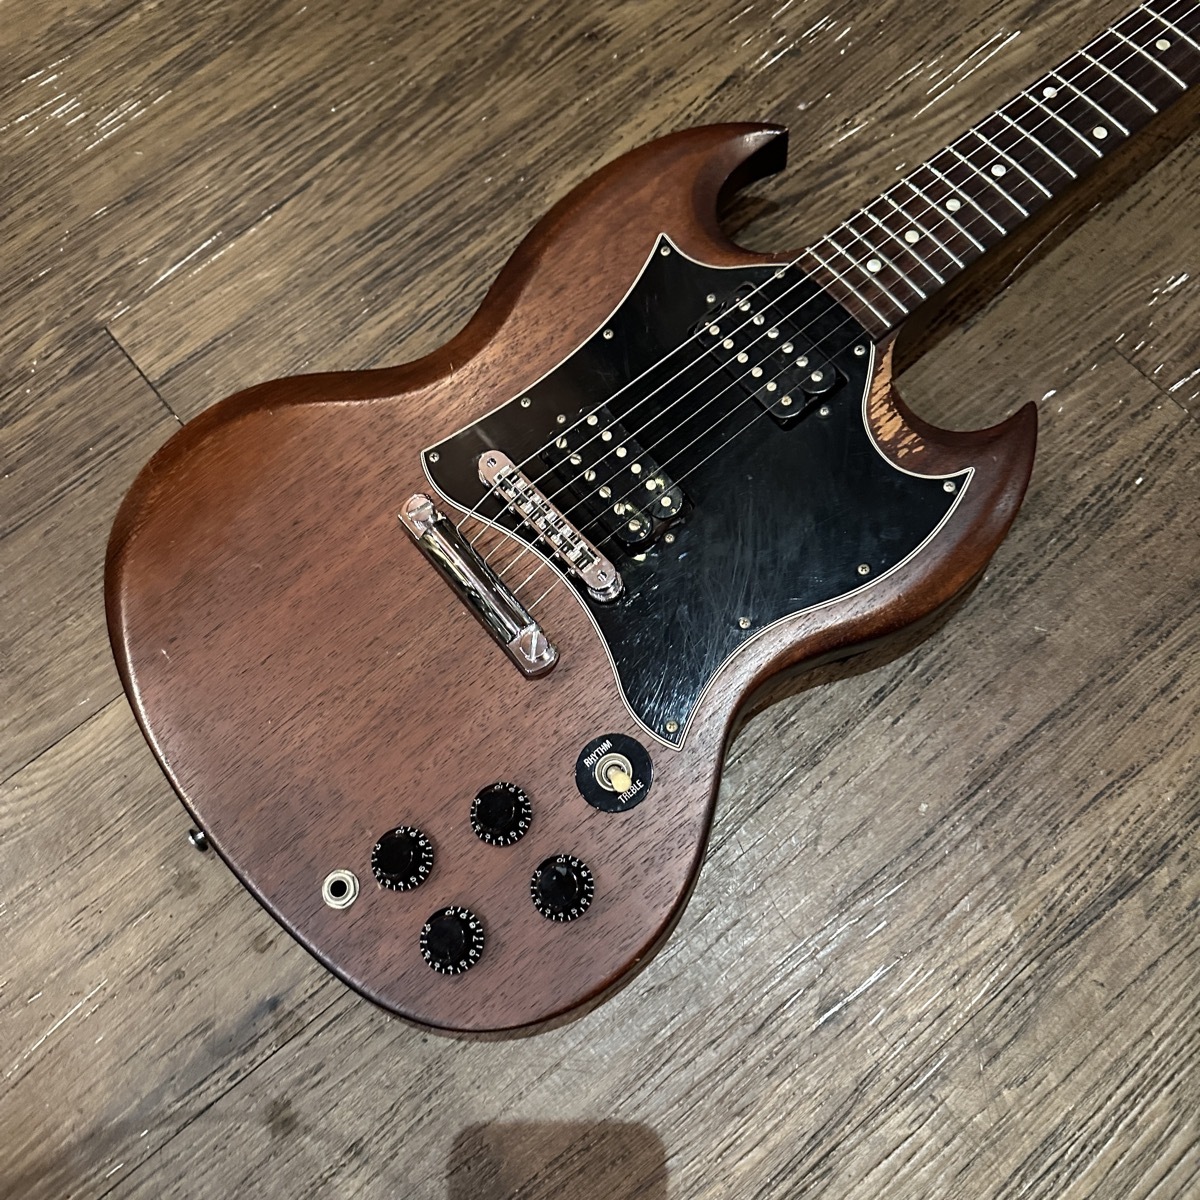 Gibson SG Special Faded 2005年製 Electric Guitar エレキギター ギブソン -e566_画像2